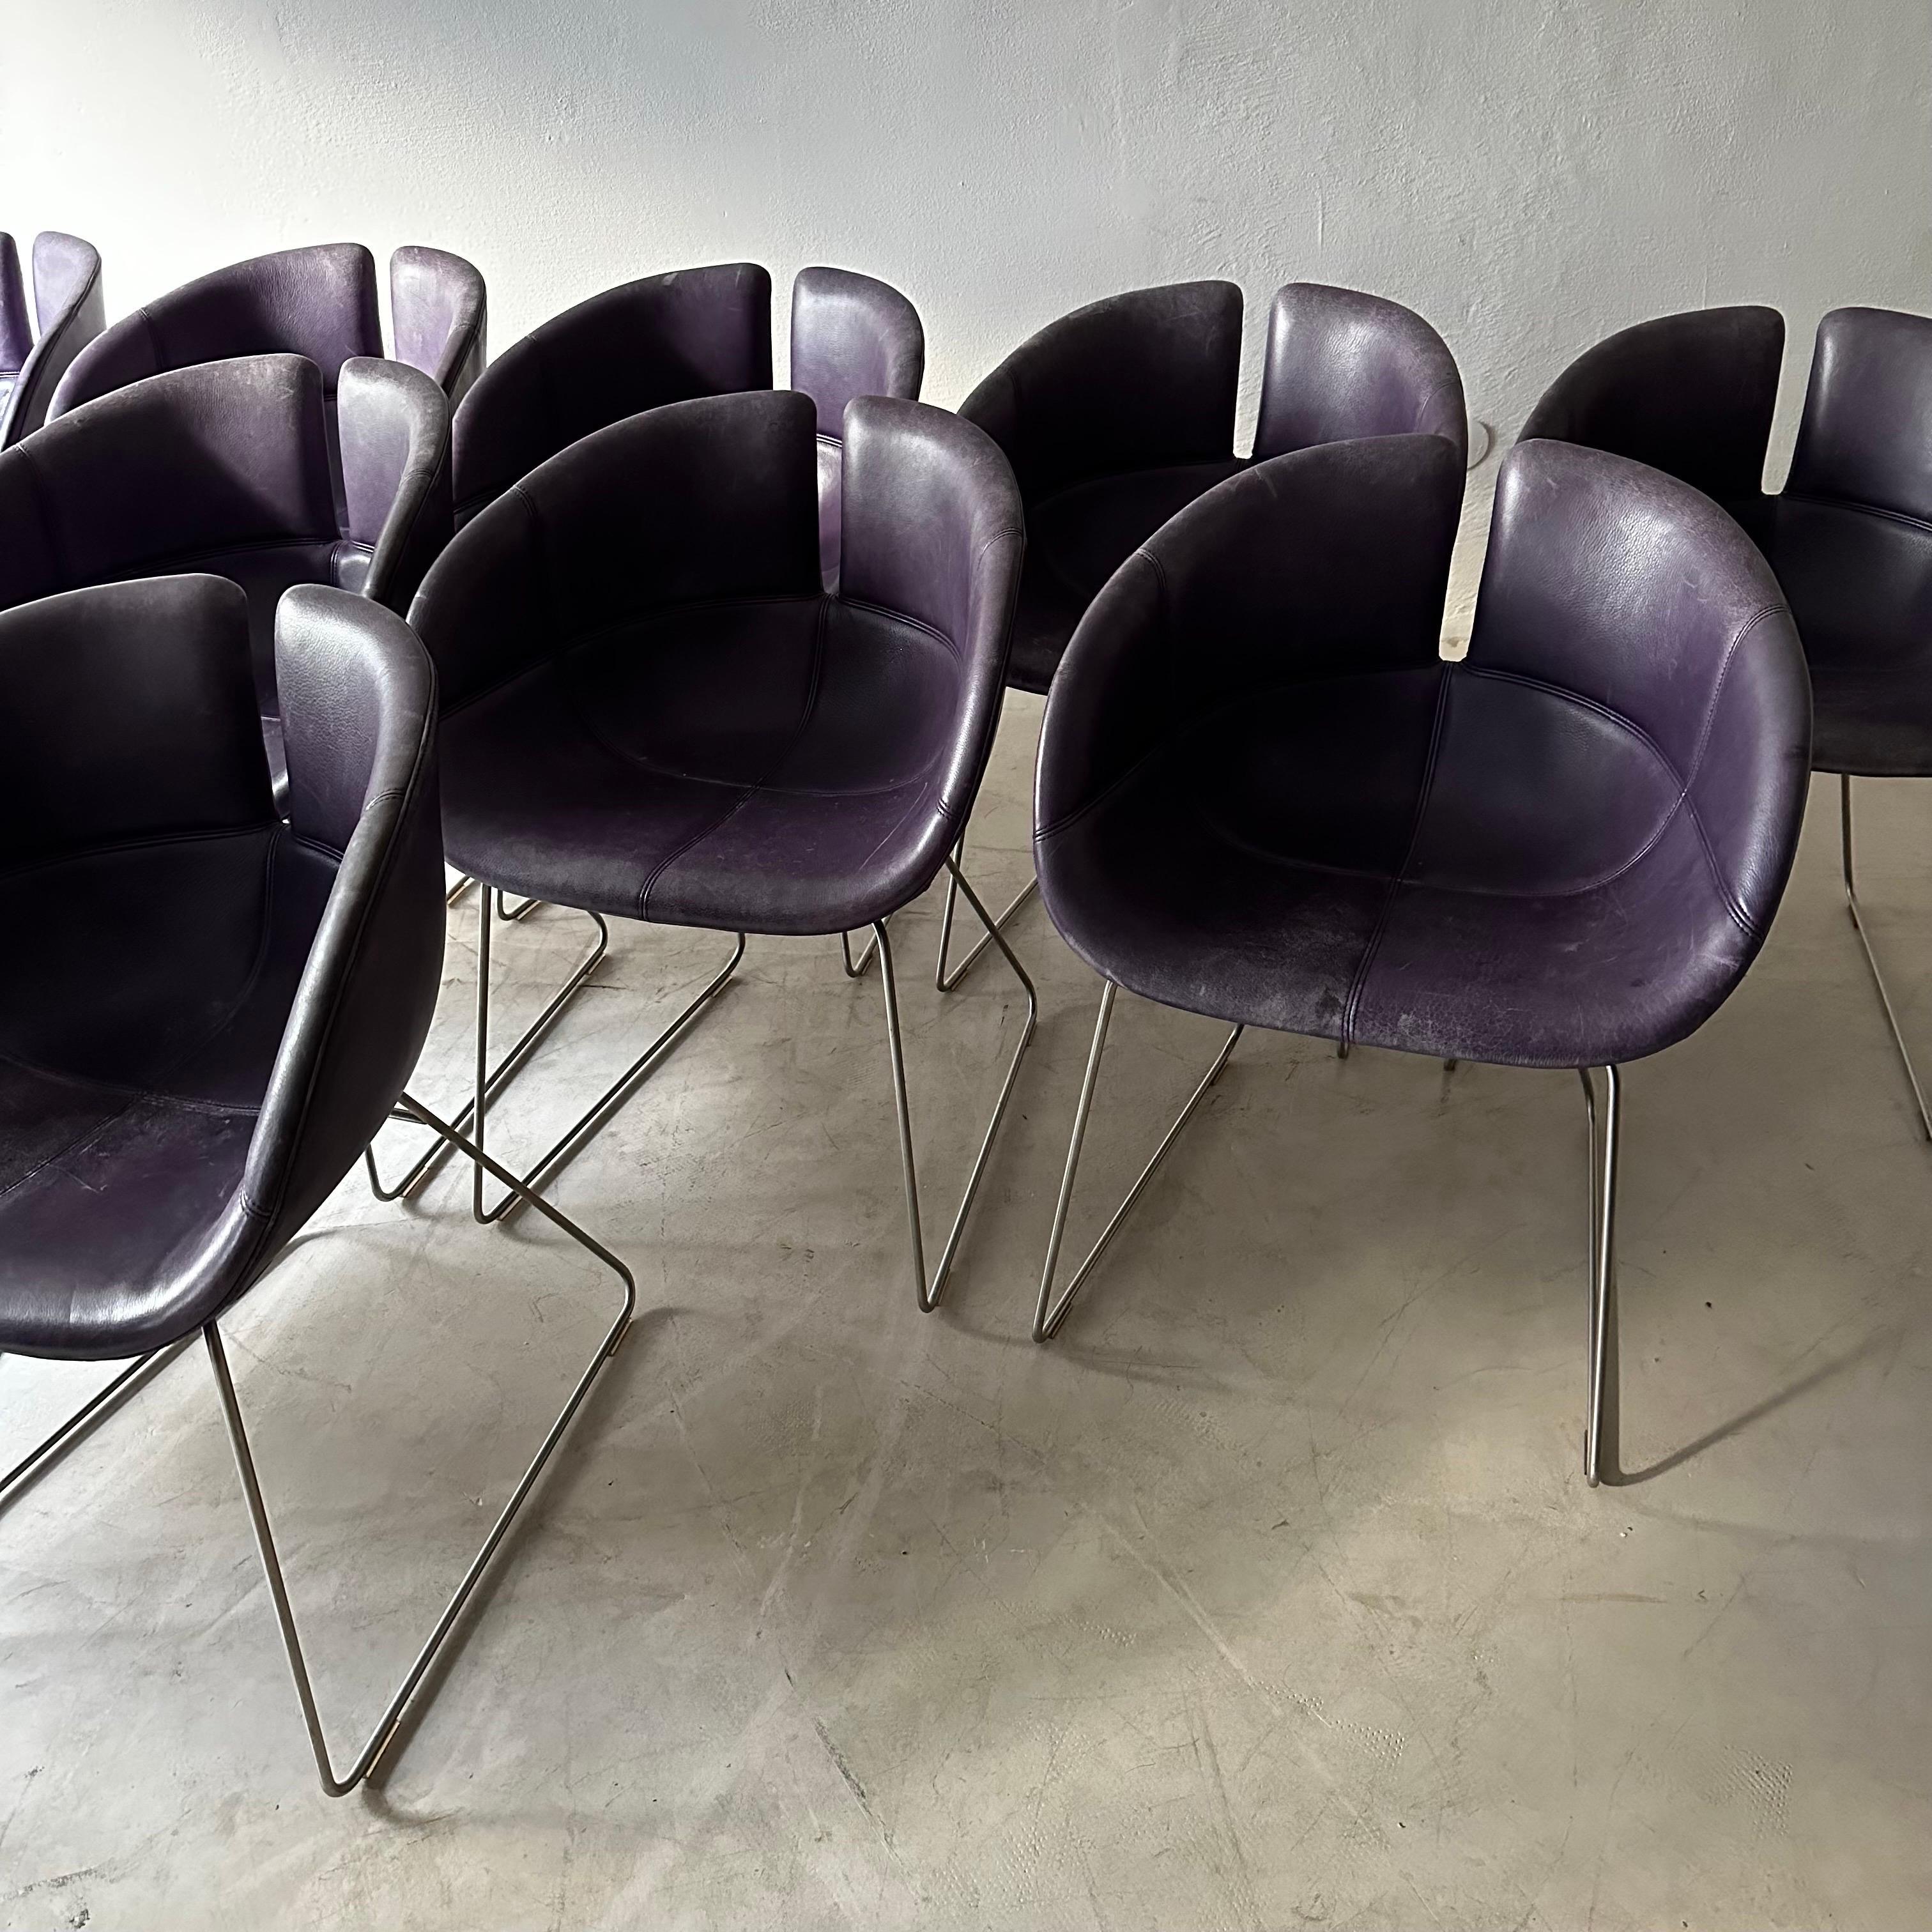 Set of 12 Moroso Dining Chairs in Purple Leather by Patricia Urquiola 2002 In Good Condition For Sale In Vienna, AT